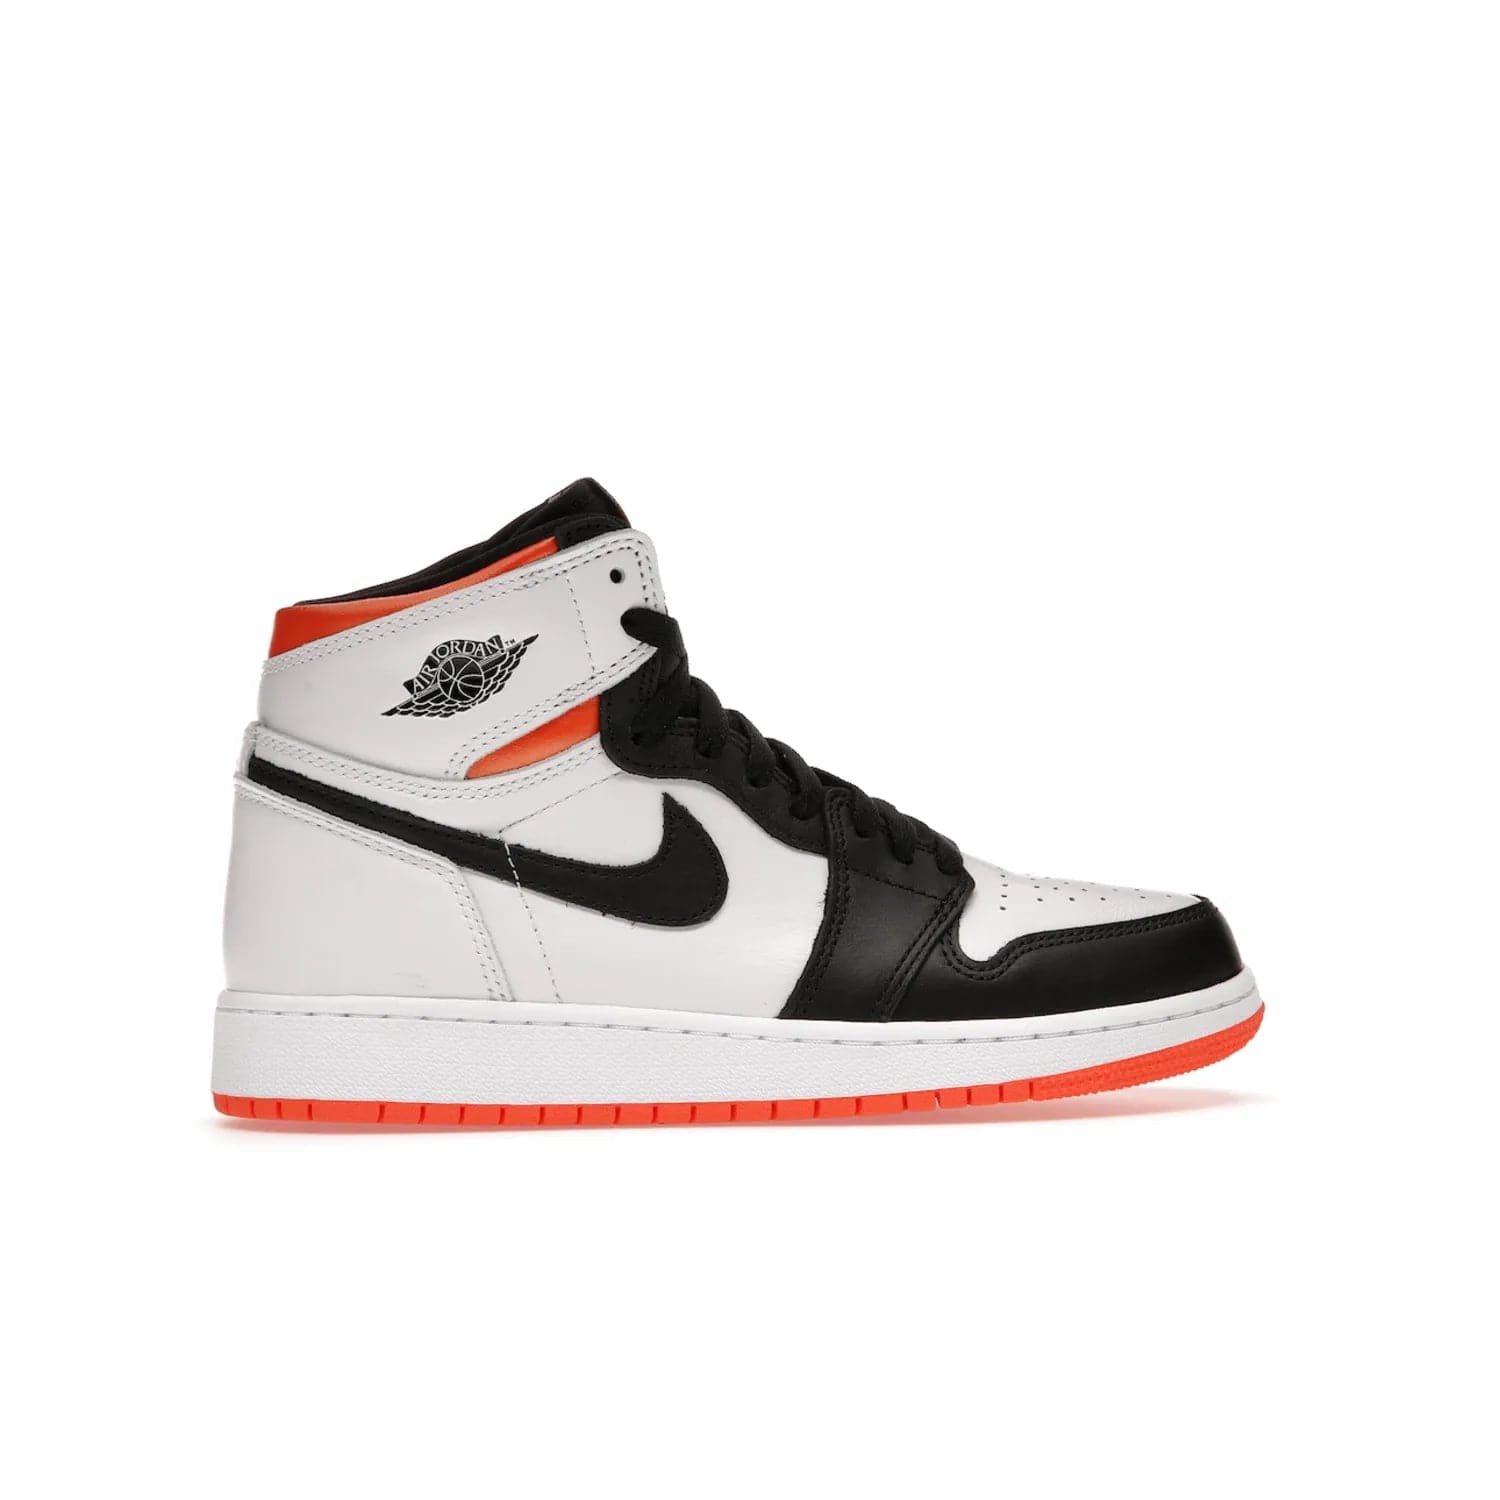 Jordan 1 High OG Electro Orange (GS) - Image 36 - Only at www.BallersClubKickz.com - The Air Jordan 1 High OG Electro Orange GS is the ideal shoe for kids on the go. Featuring white leather uppers, black overlays, and bright orange accents, it's sure to become a favorite. A great mix of classic style and vibrant colors, the shoe delivers air cushioning for comfort and hard orange rubber for grip. Release on July 17th, 2021. Get them a pair today.